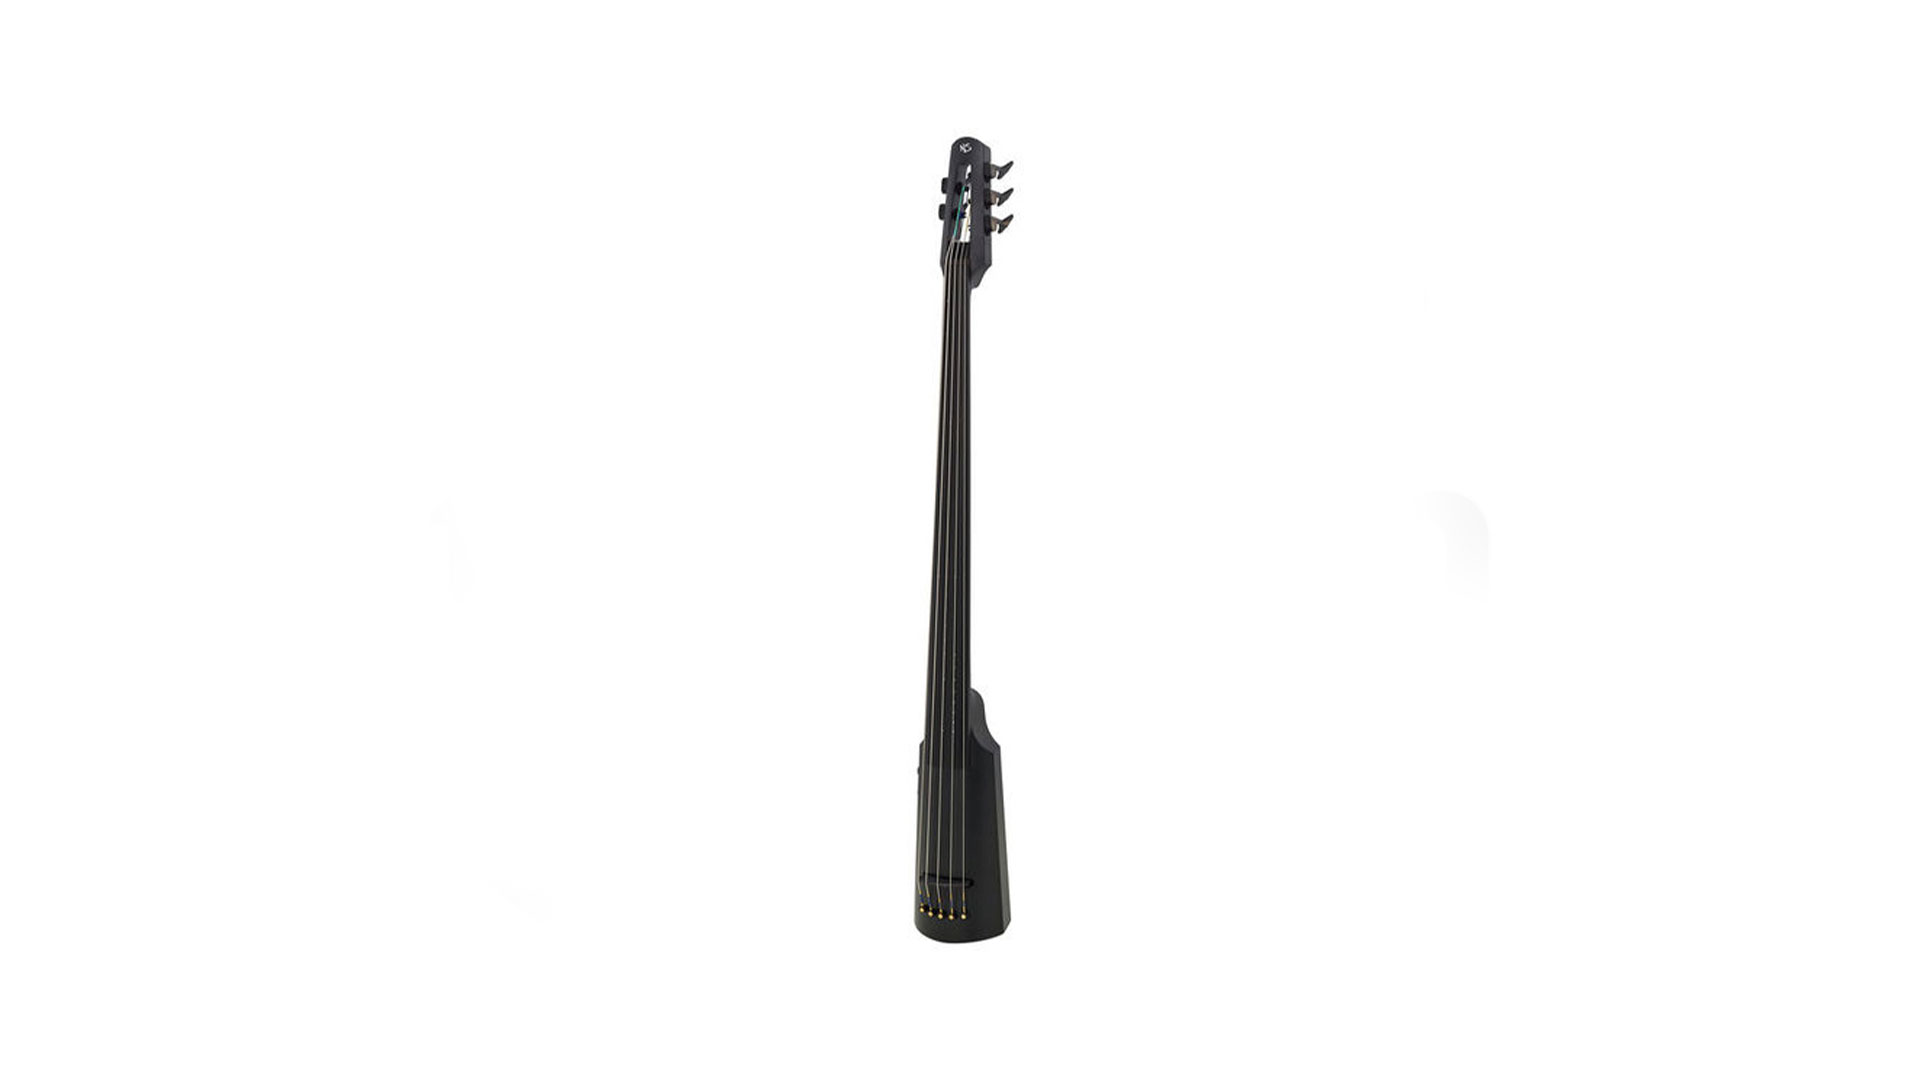 Top 5-String Electric Double Basses